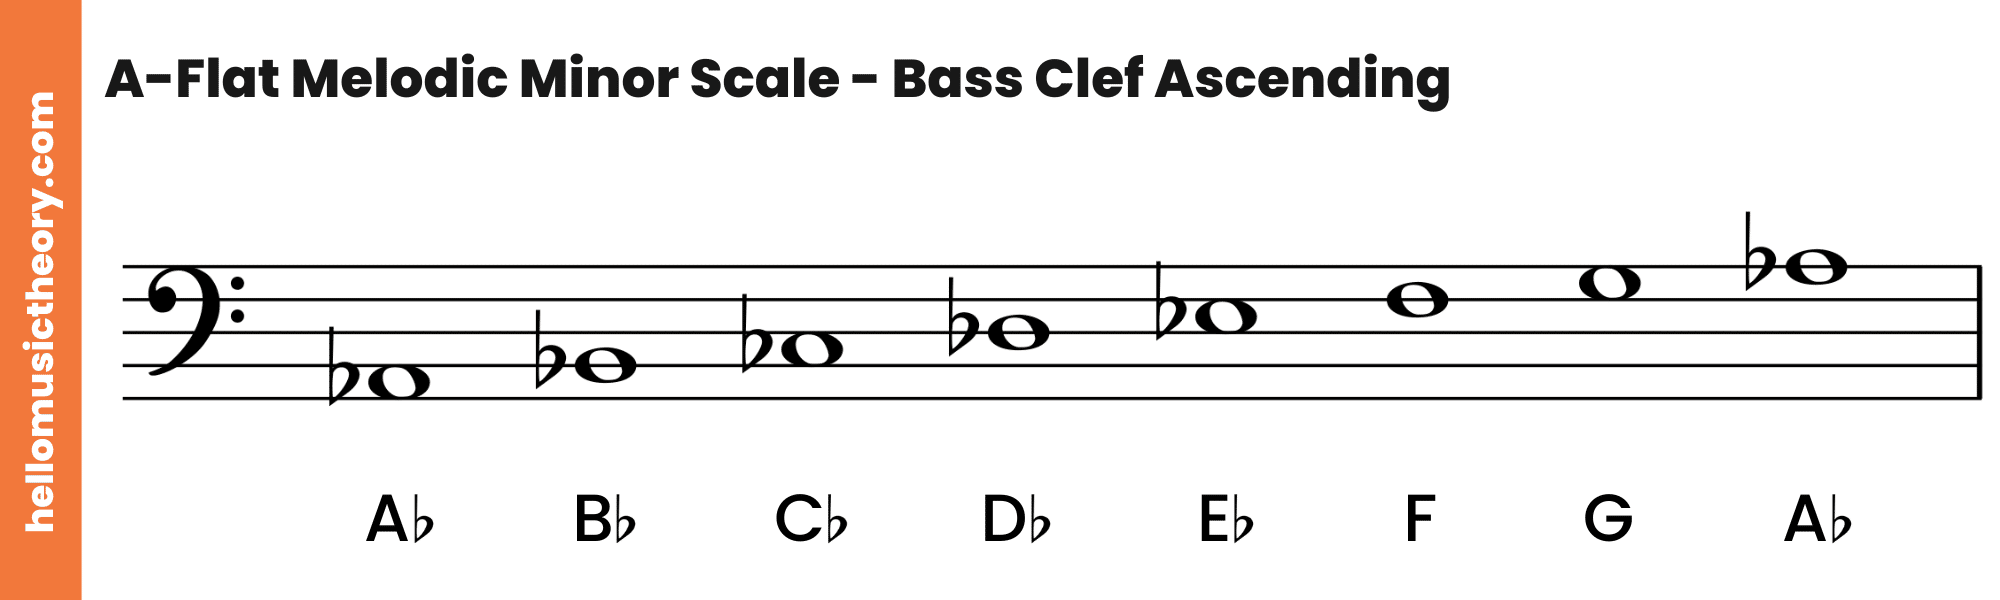 A-Flat Melodic Minor Scale Bass Clef Ascending